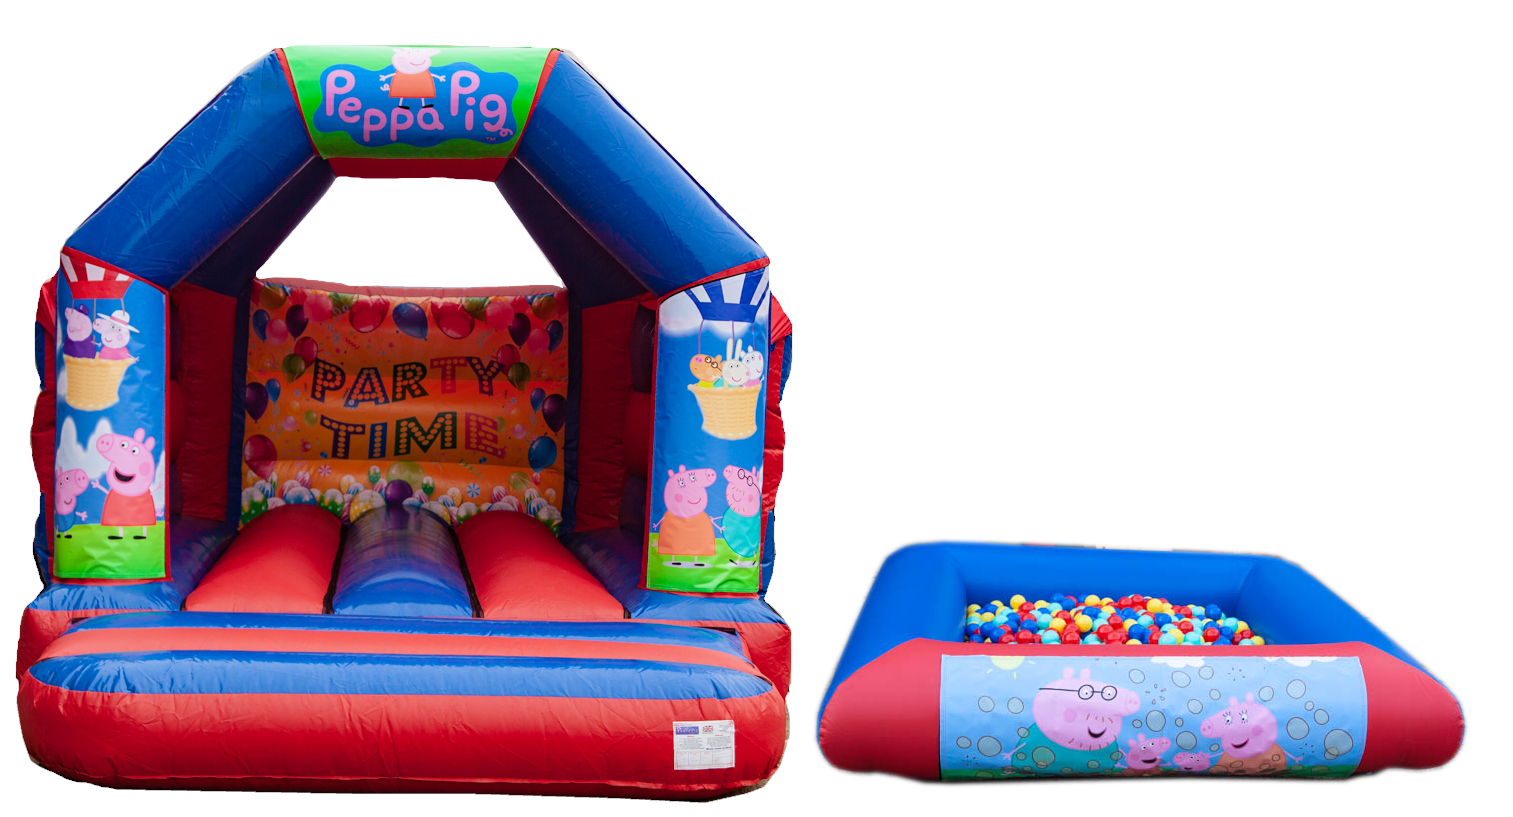 Red & Blue Bouncy castle and ball pool package for hire in Stotfold